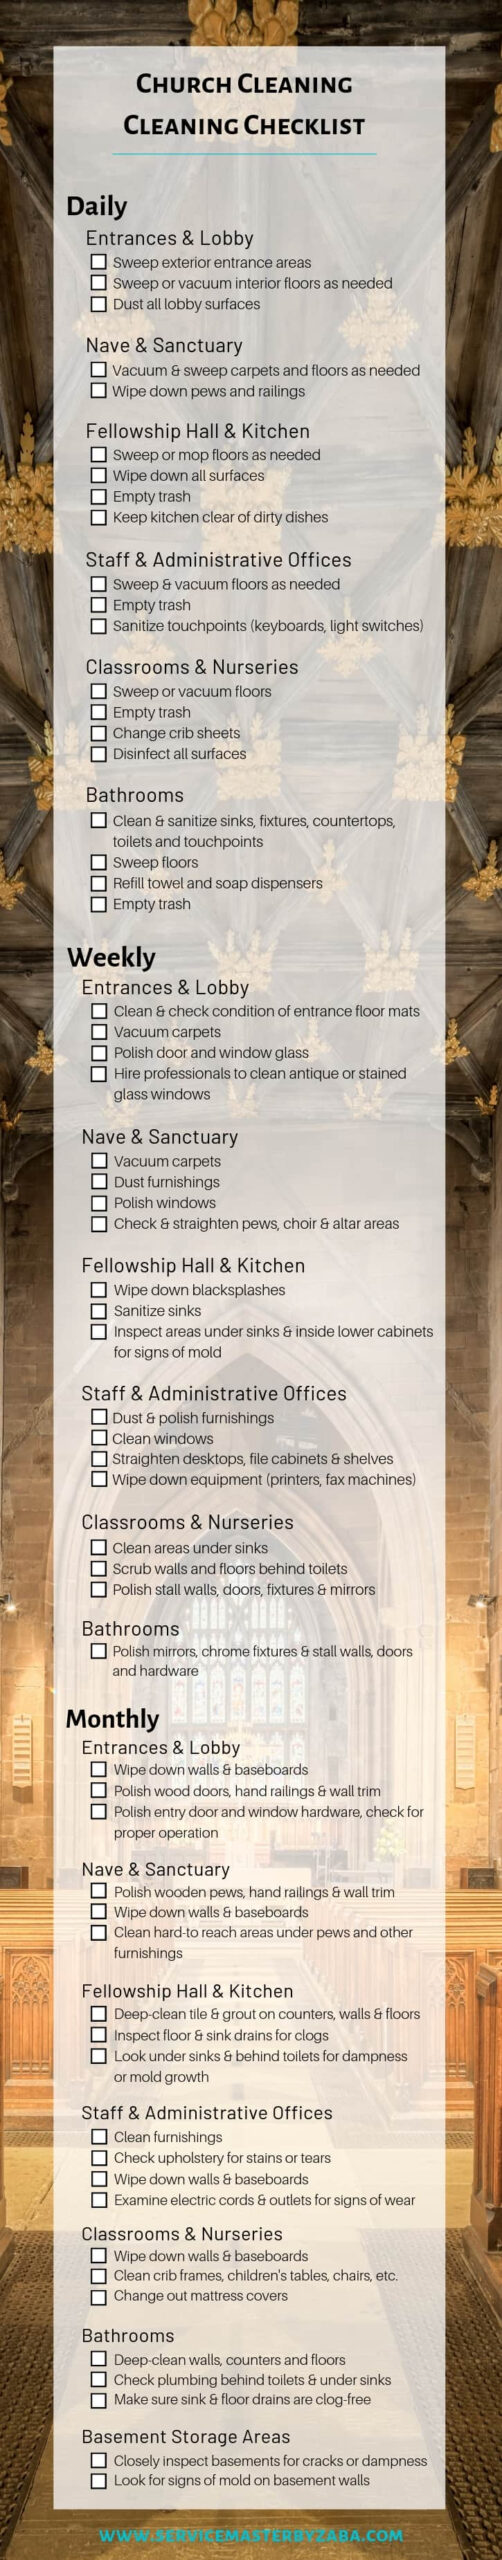 Church Cleaning Checklist: Daily, Weekly & Monthly Guidelines  For Church Cleaning Checklist Template Intended For Church Cleaning Checklist Template